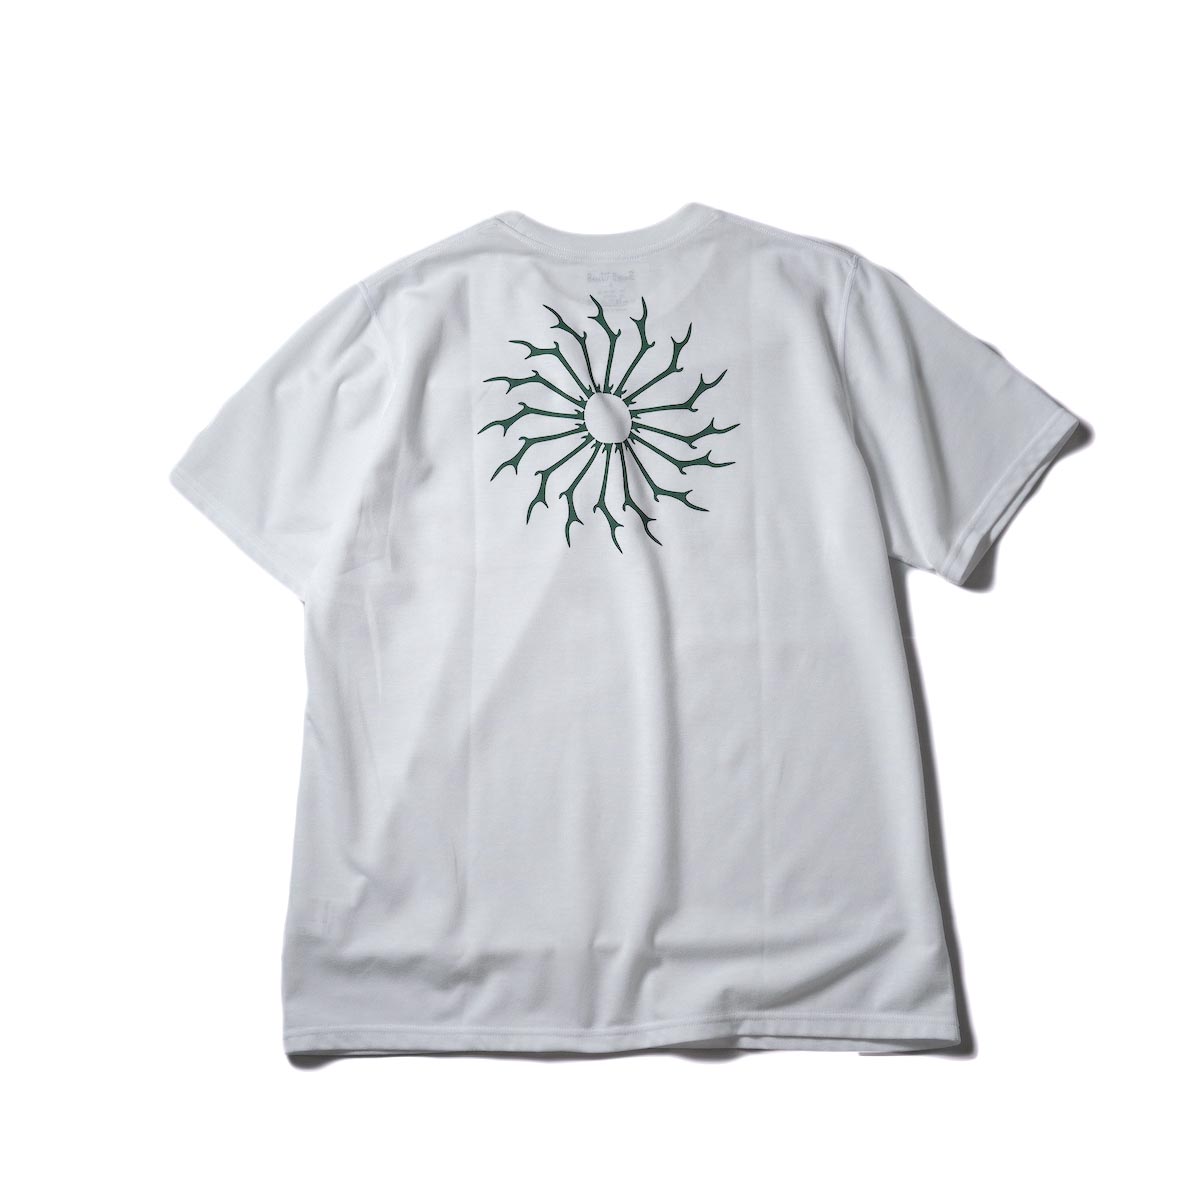 South2 West8 / S/S ROUND POCKET TEE - CIRCLE HORN (White)